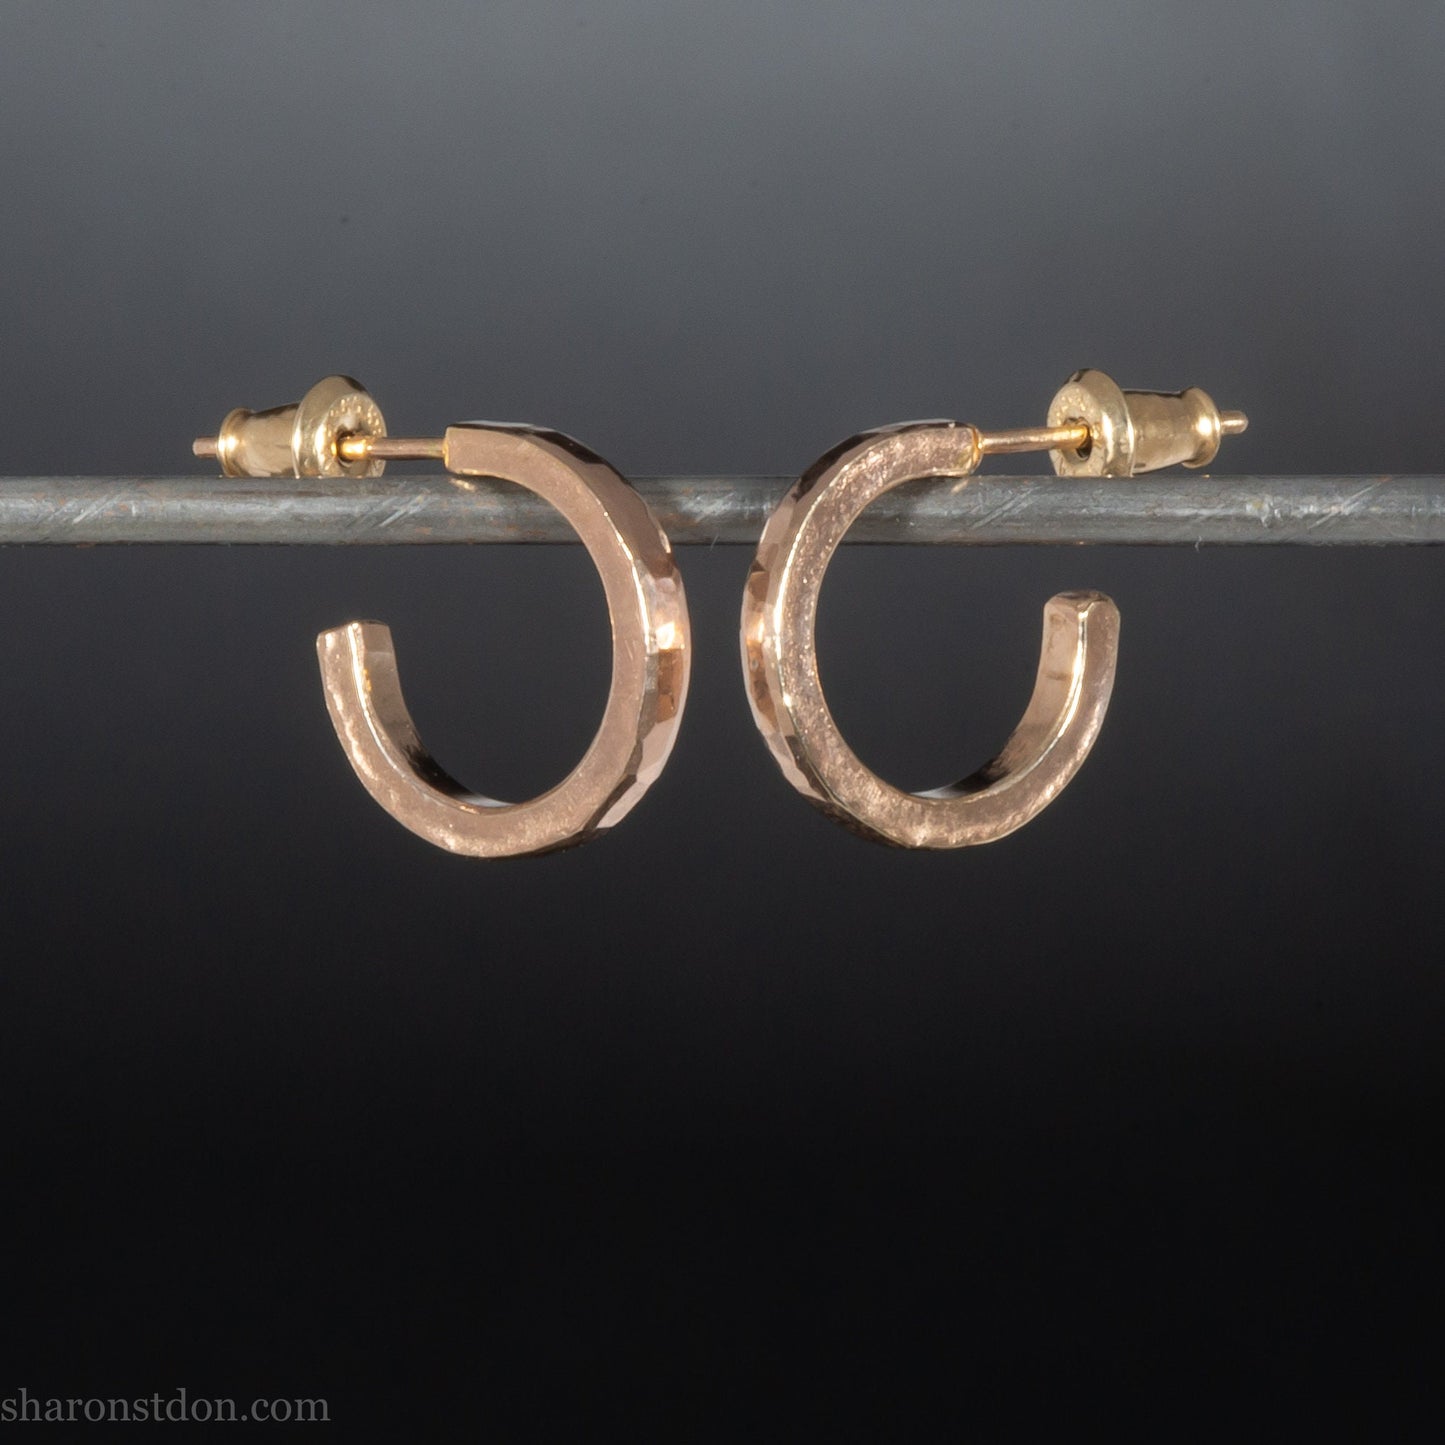 Gold hoop earrings set handmade in North America by Sharon SaintDon. Solid 14k yellow gold, 14mm diameter round with hammered texture.